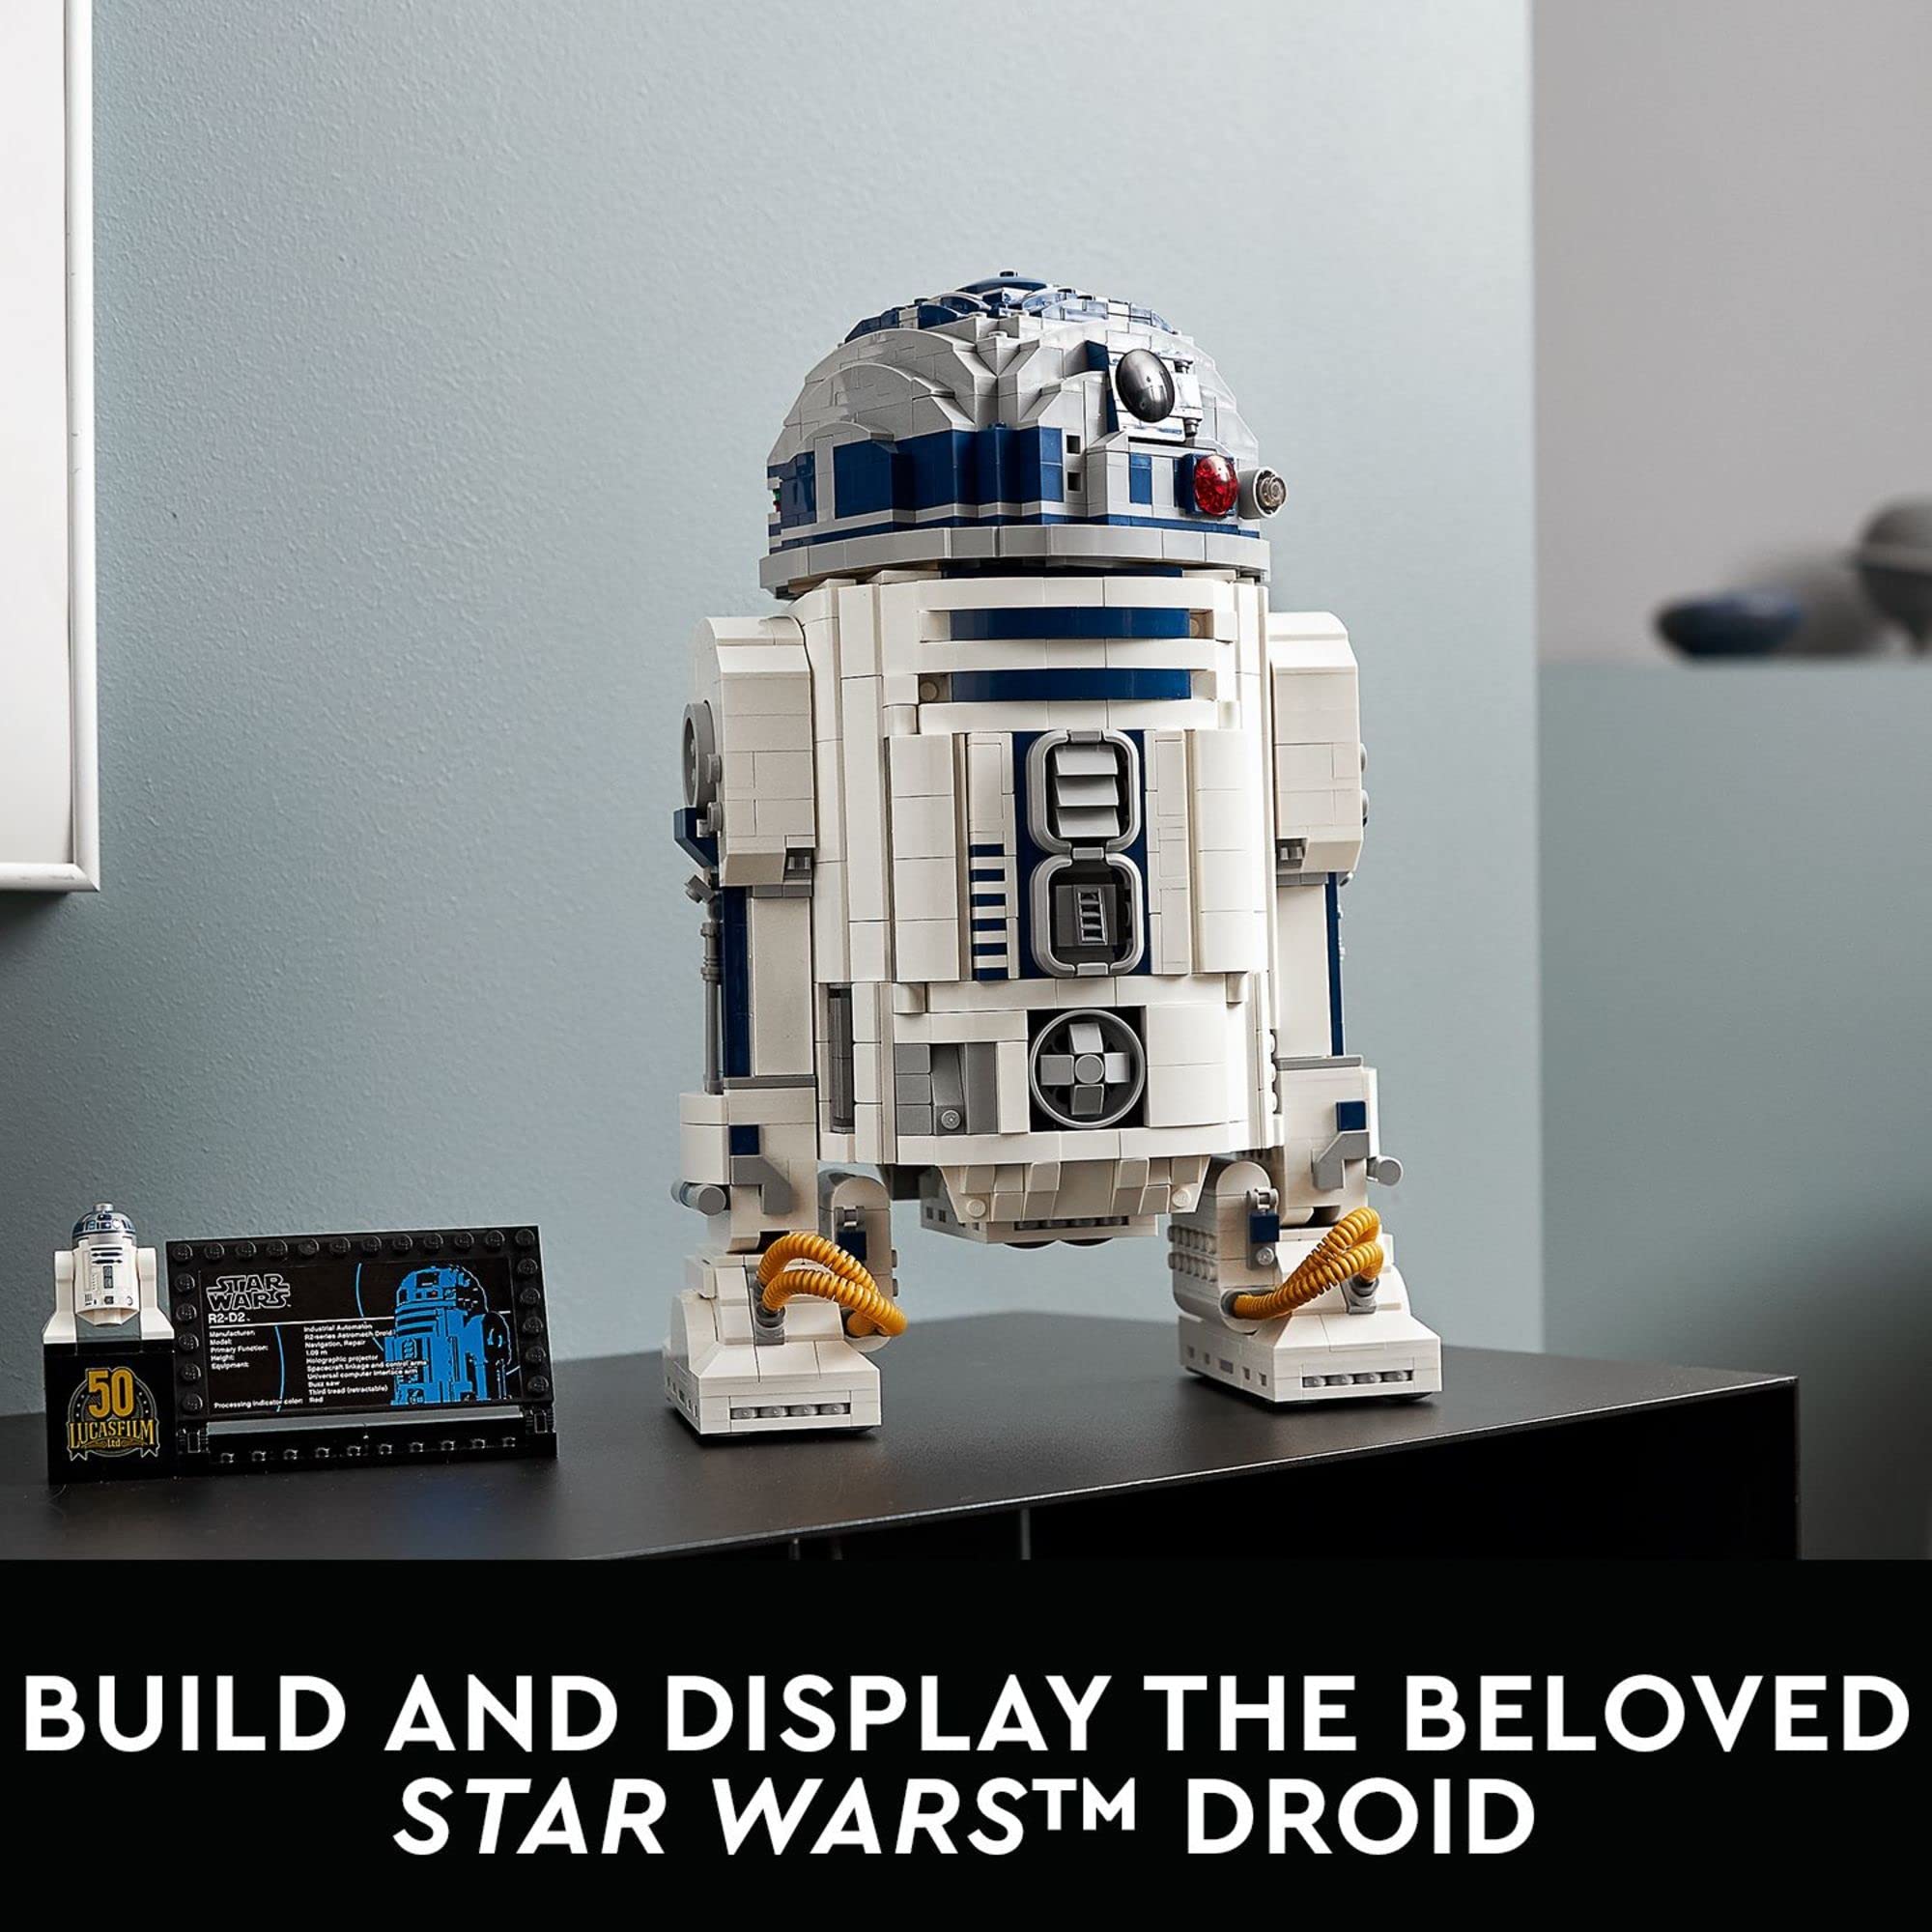 LEGO Star Wars R2-D2 75308 Droid Building Set for Adults, Collectible Display Model with Luke Skywalker’s Lightsaber, Great Birthday for Husbands, Wives, Any Star Wars Fans